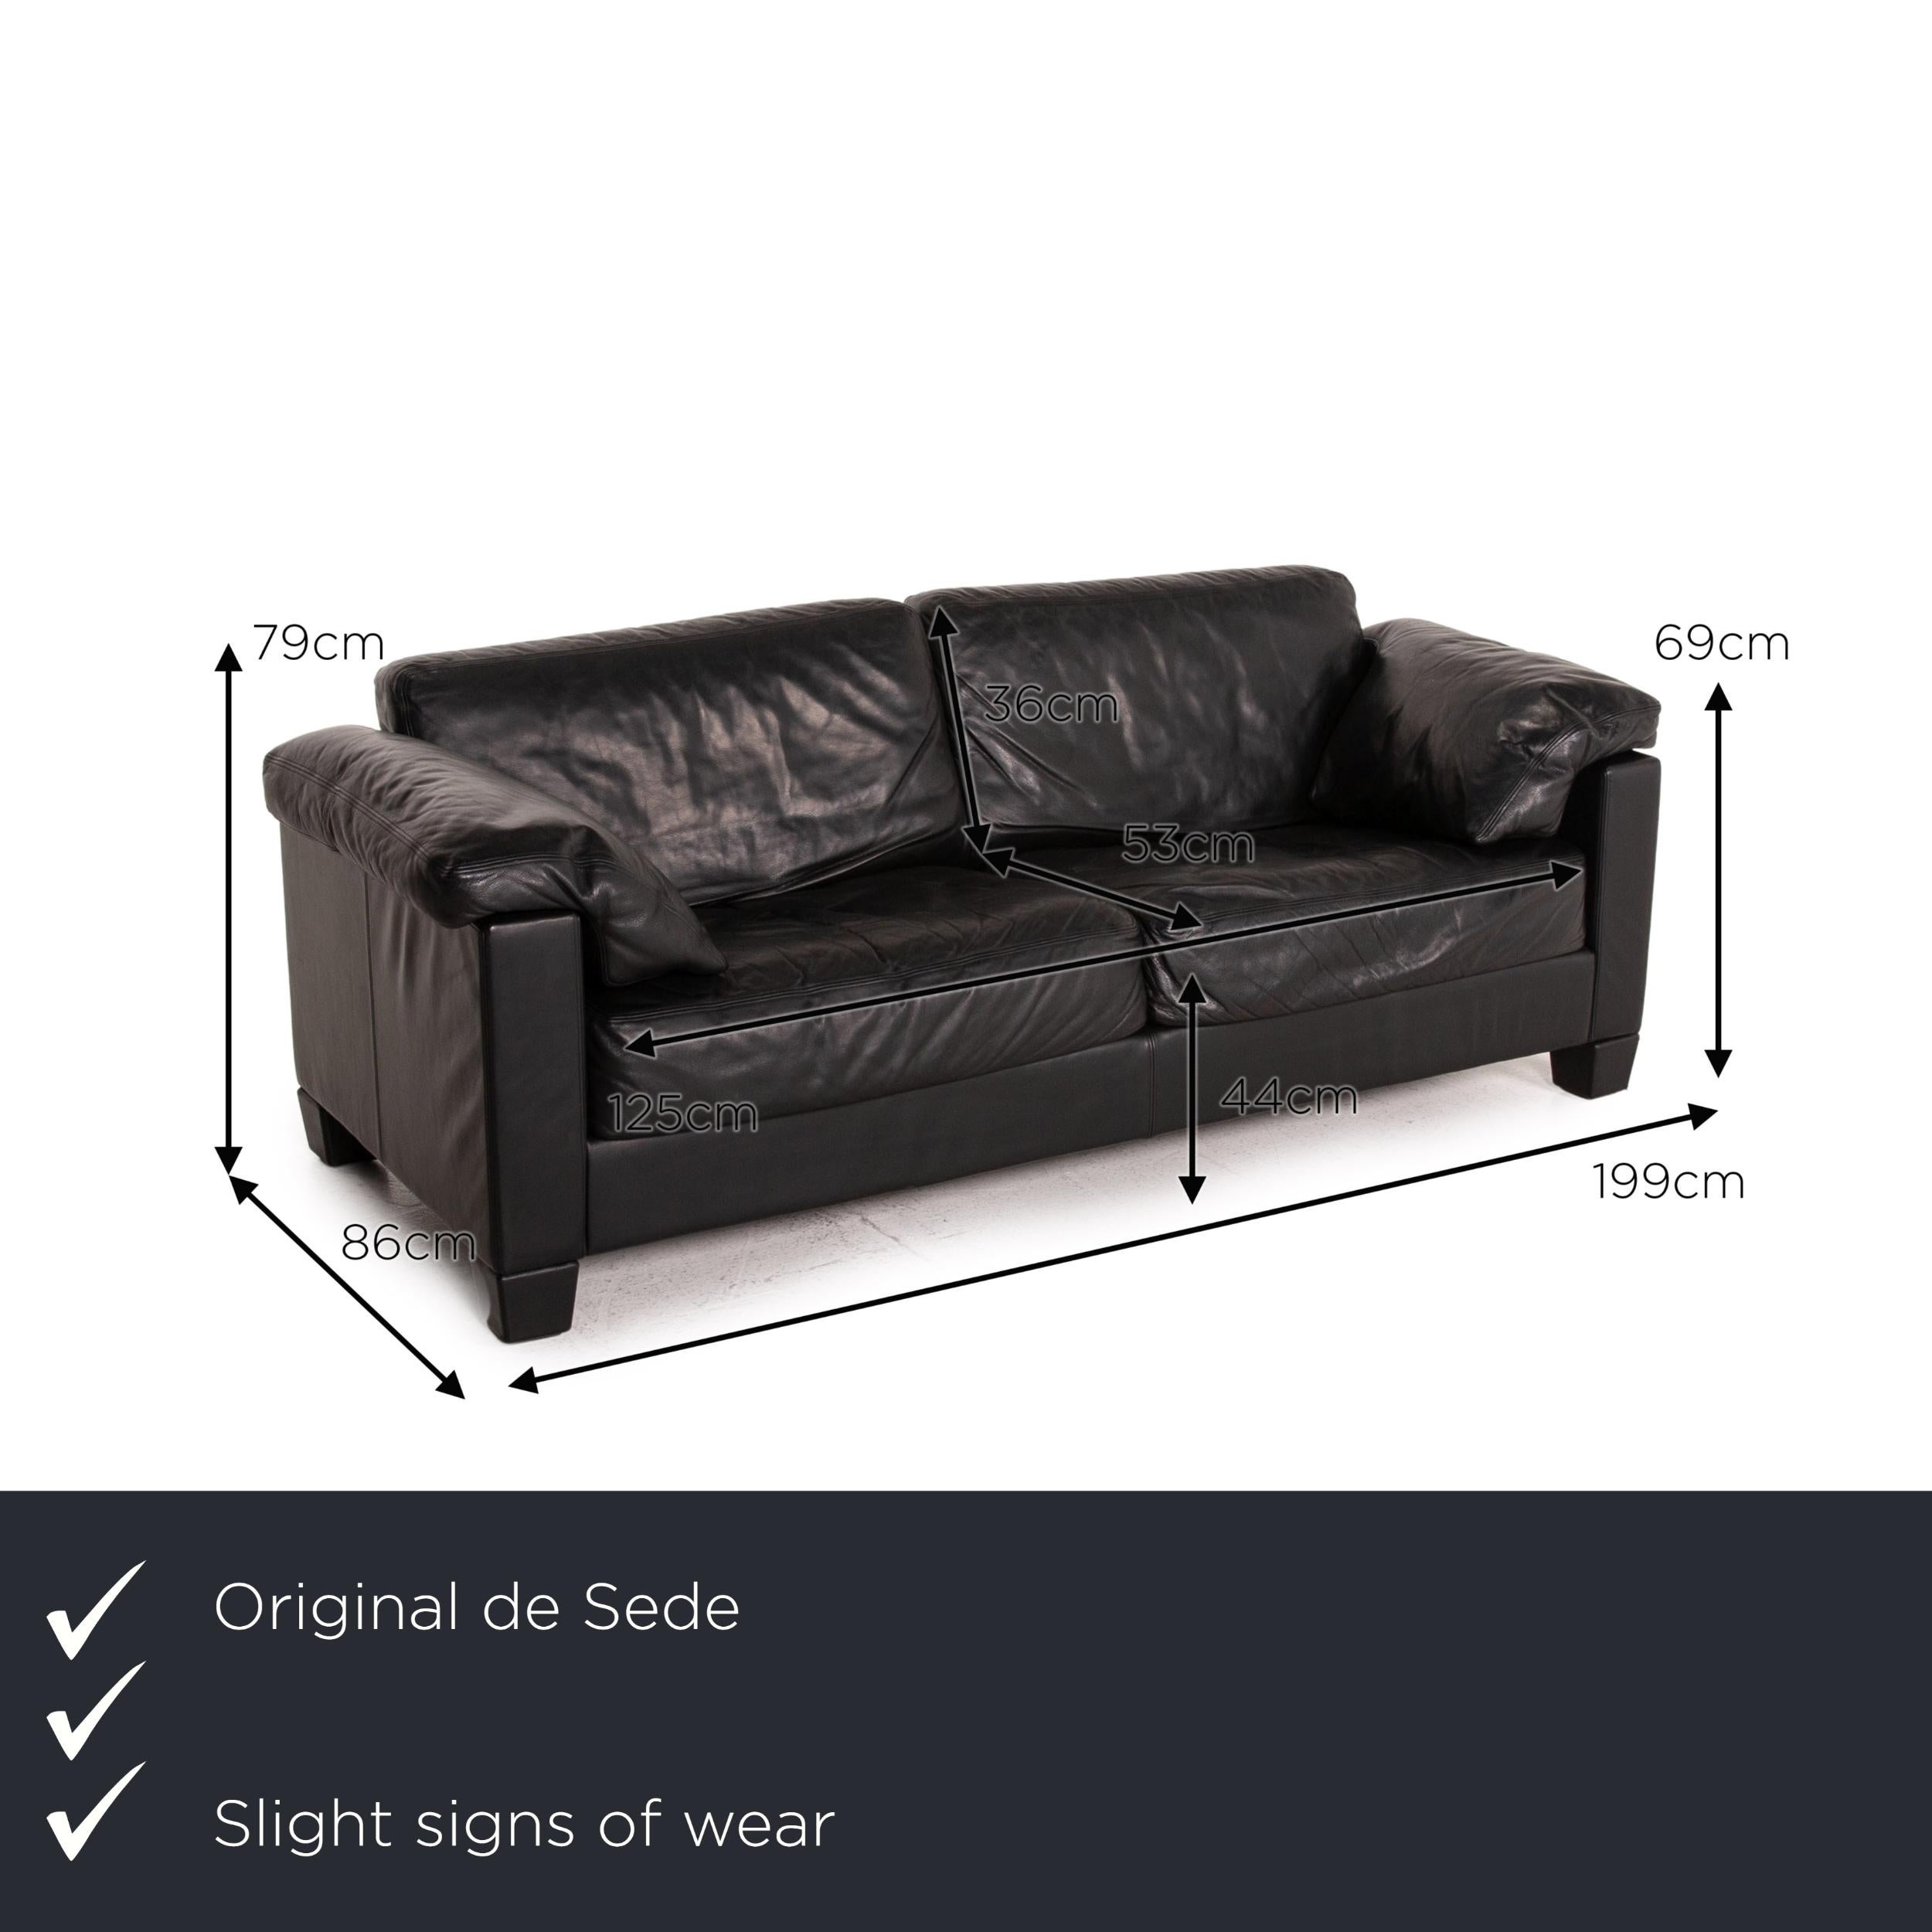 We present to you a De Sede DS 17 leather sofa black two-seater couch.
 

 Product measurements in centimeters:
 

Depth: 86
Width: 199
Height: 79
Seat height: 44
Rest height: 69
Seat depth: 53
Seat width: 125
Back height: 36.

 